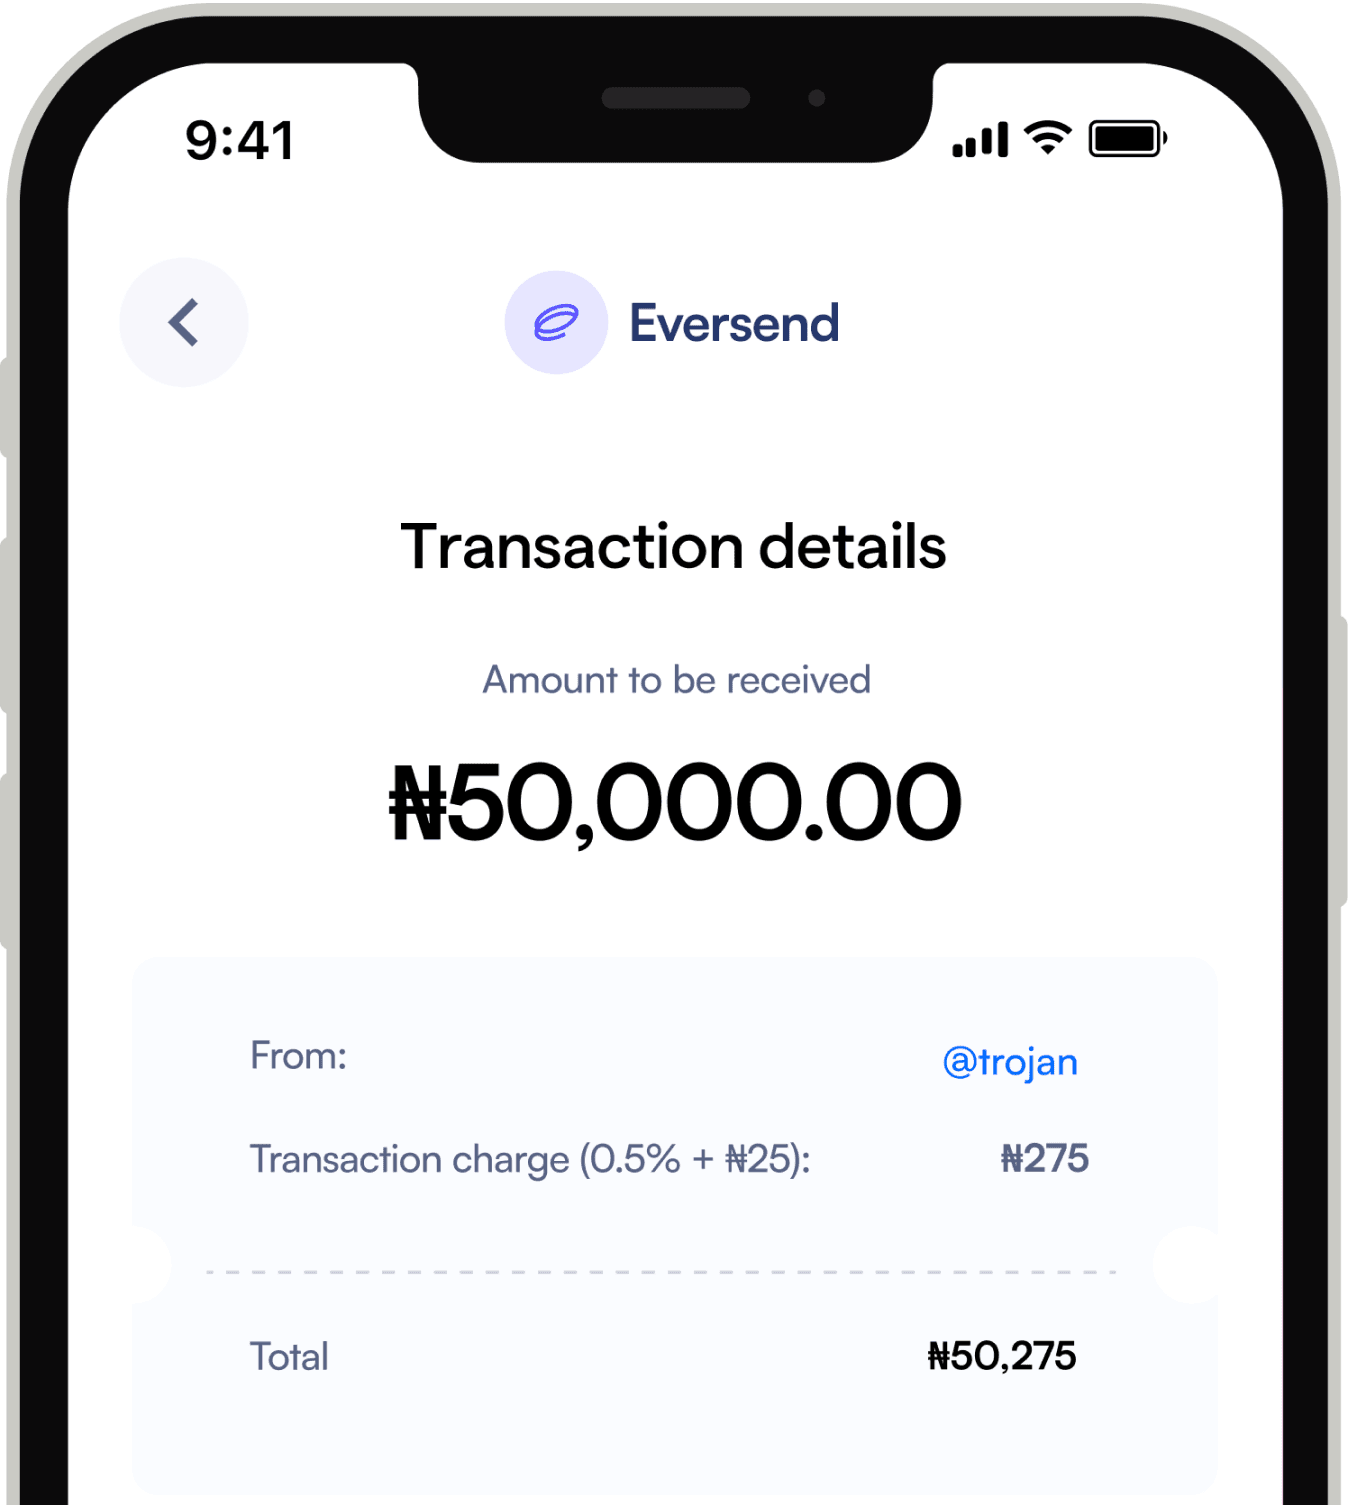 An image of a phone screen showing transaction details such as amount to be received, from, transaction charges and total